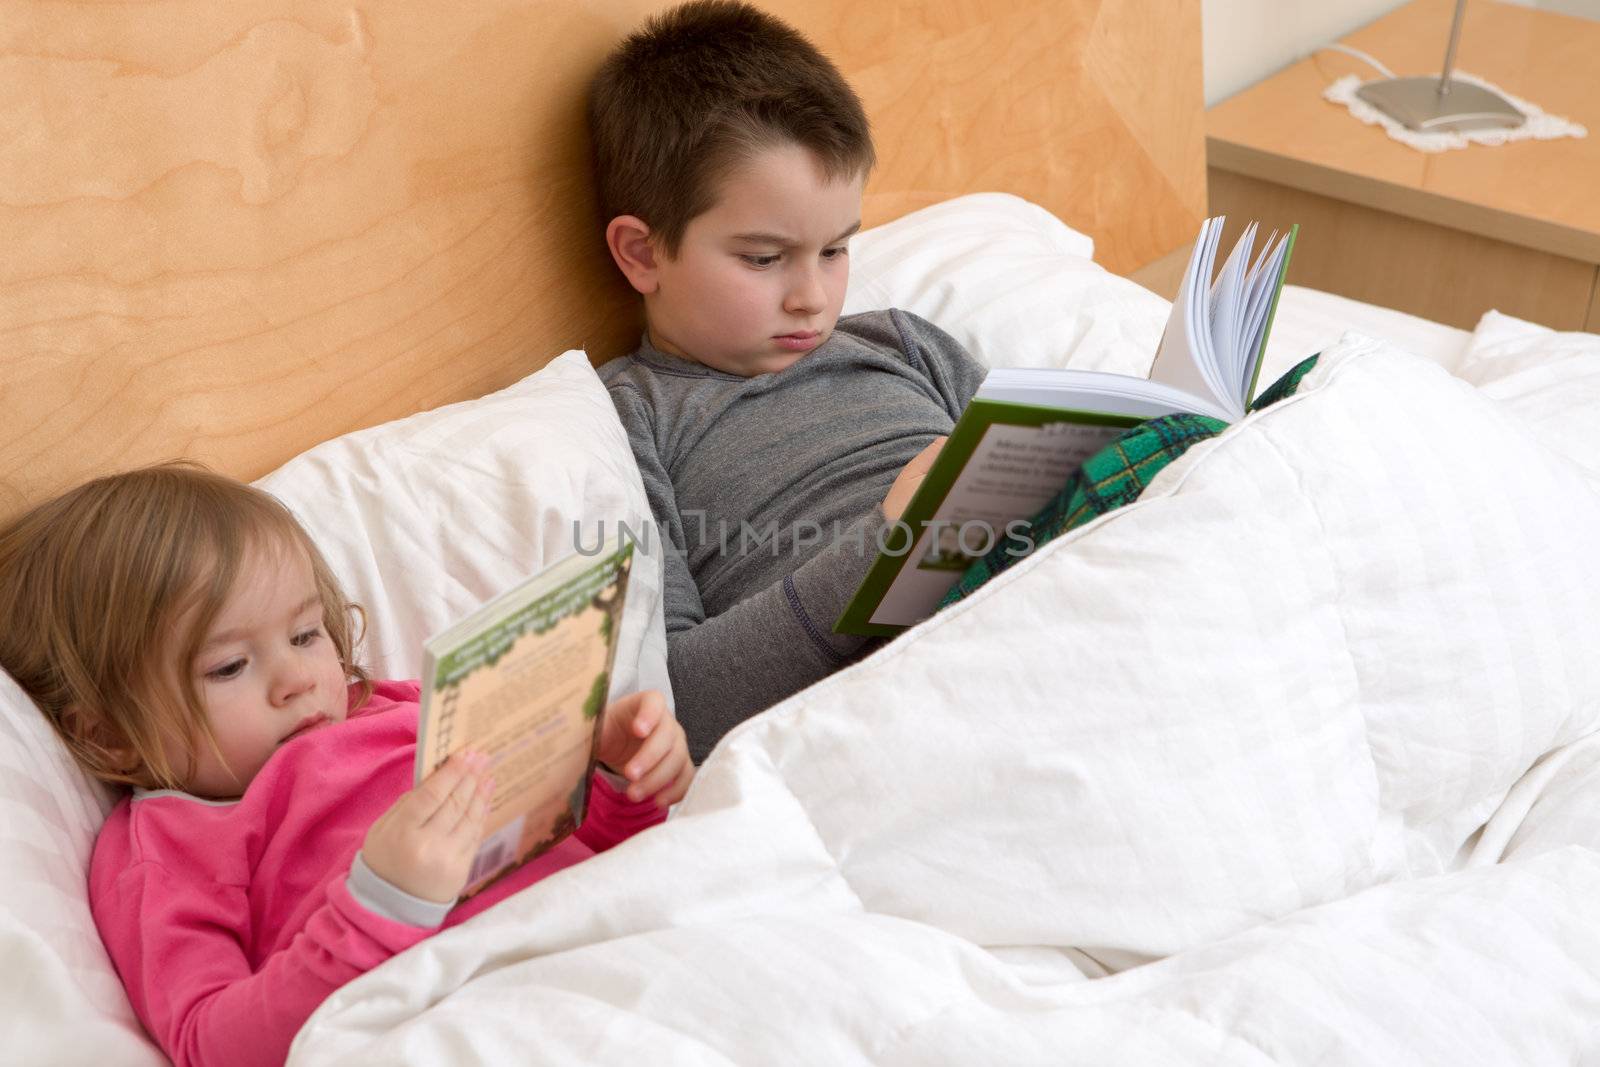 Reading habits starts with early age; siblings are reading their books before fall asleep. Perhaps cute toddler is just browsing the pages in her pink pajamas.